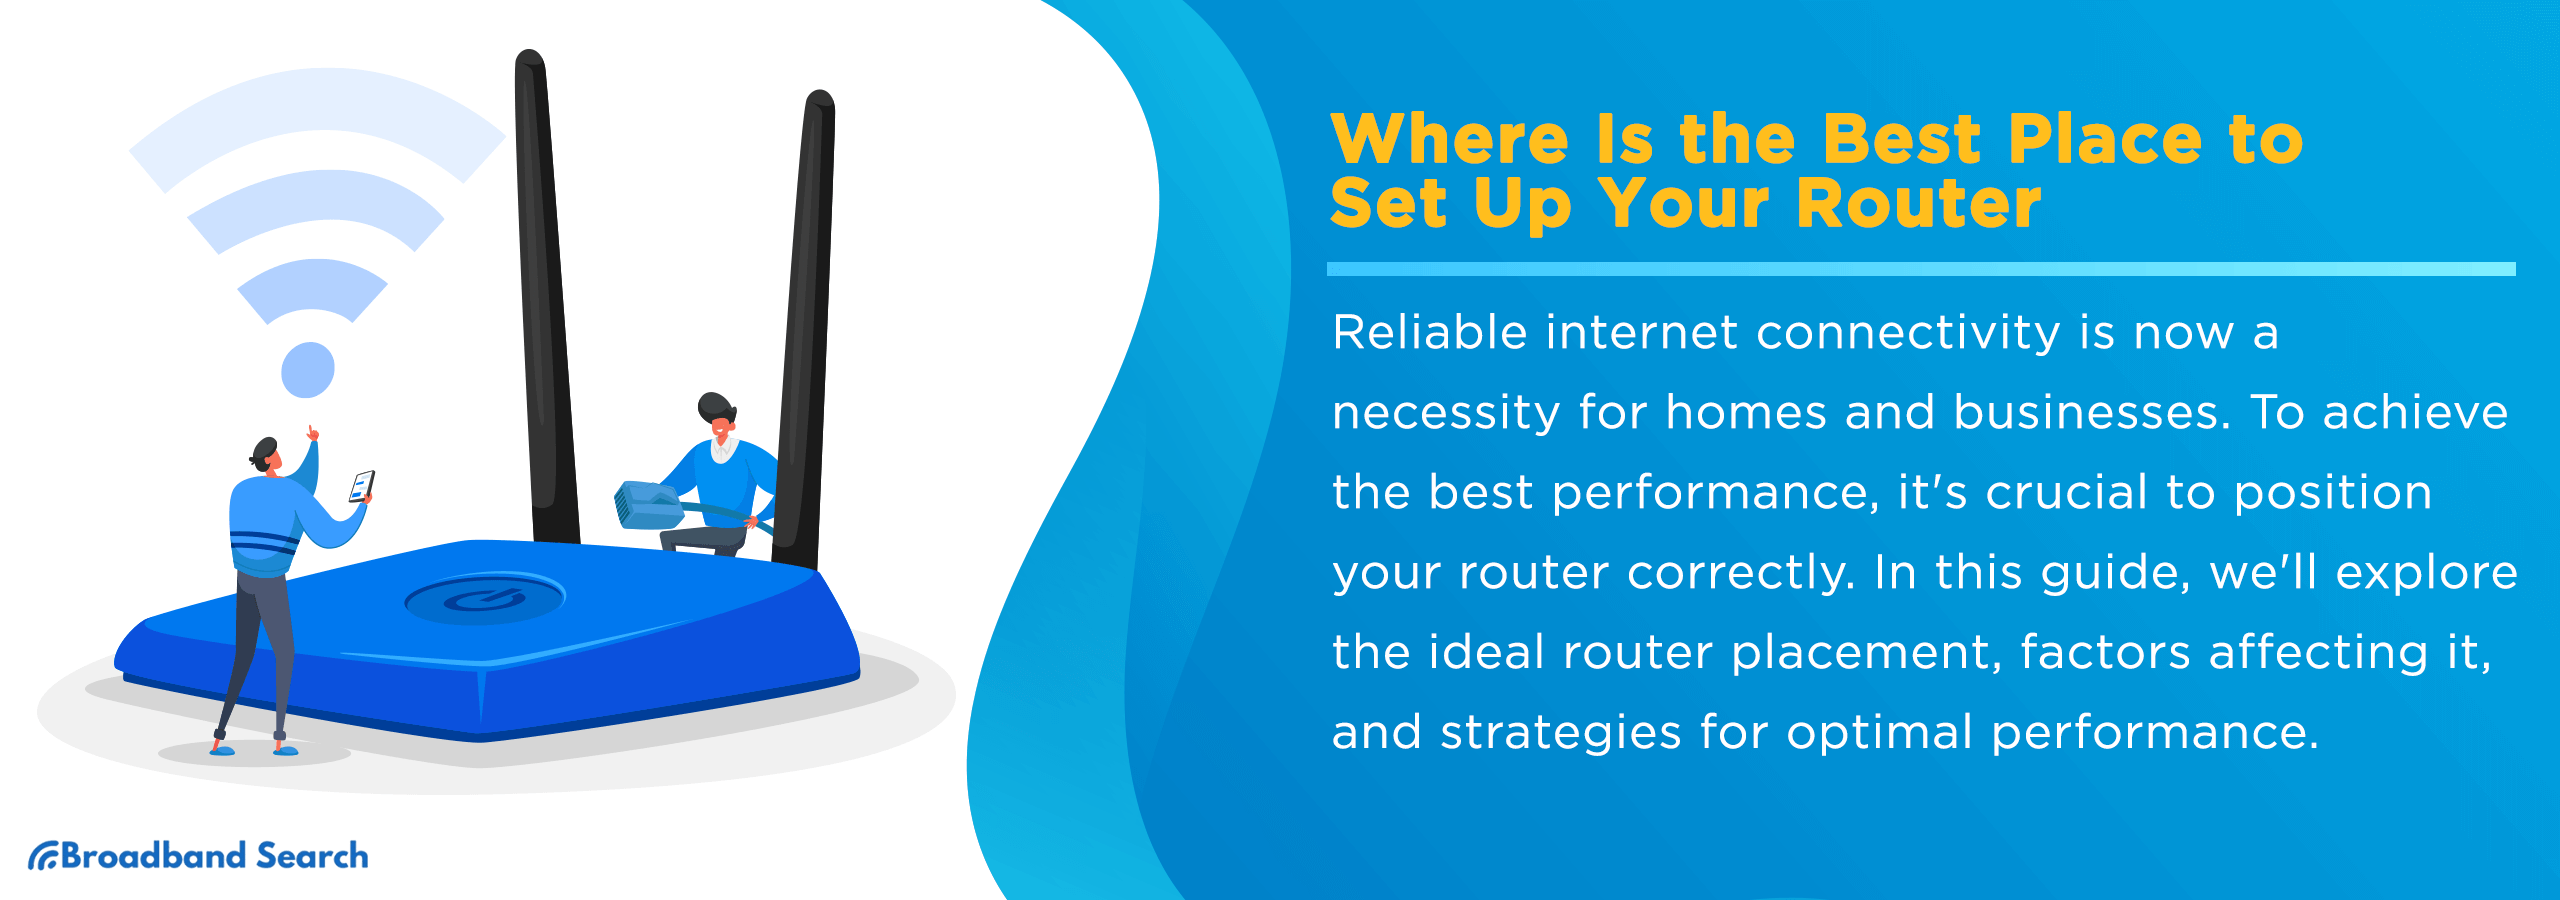 Guide to the Best Router Placement & Signals